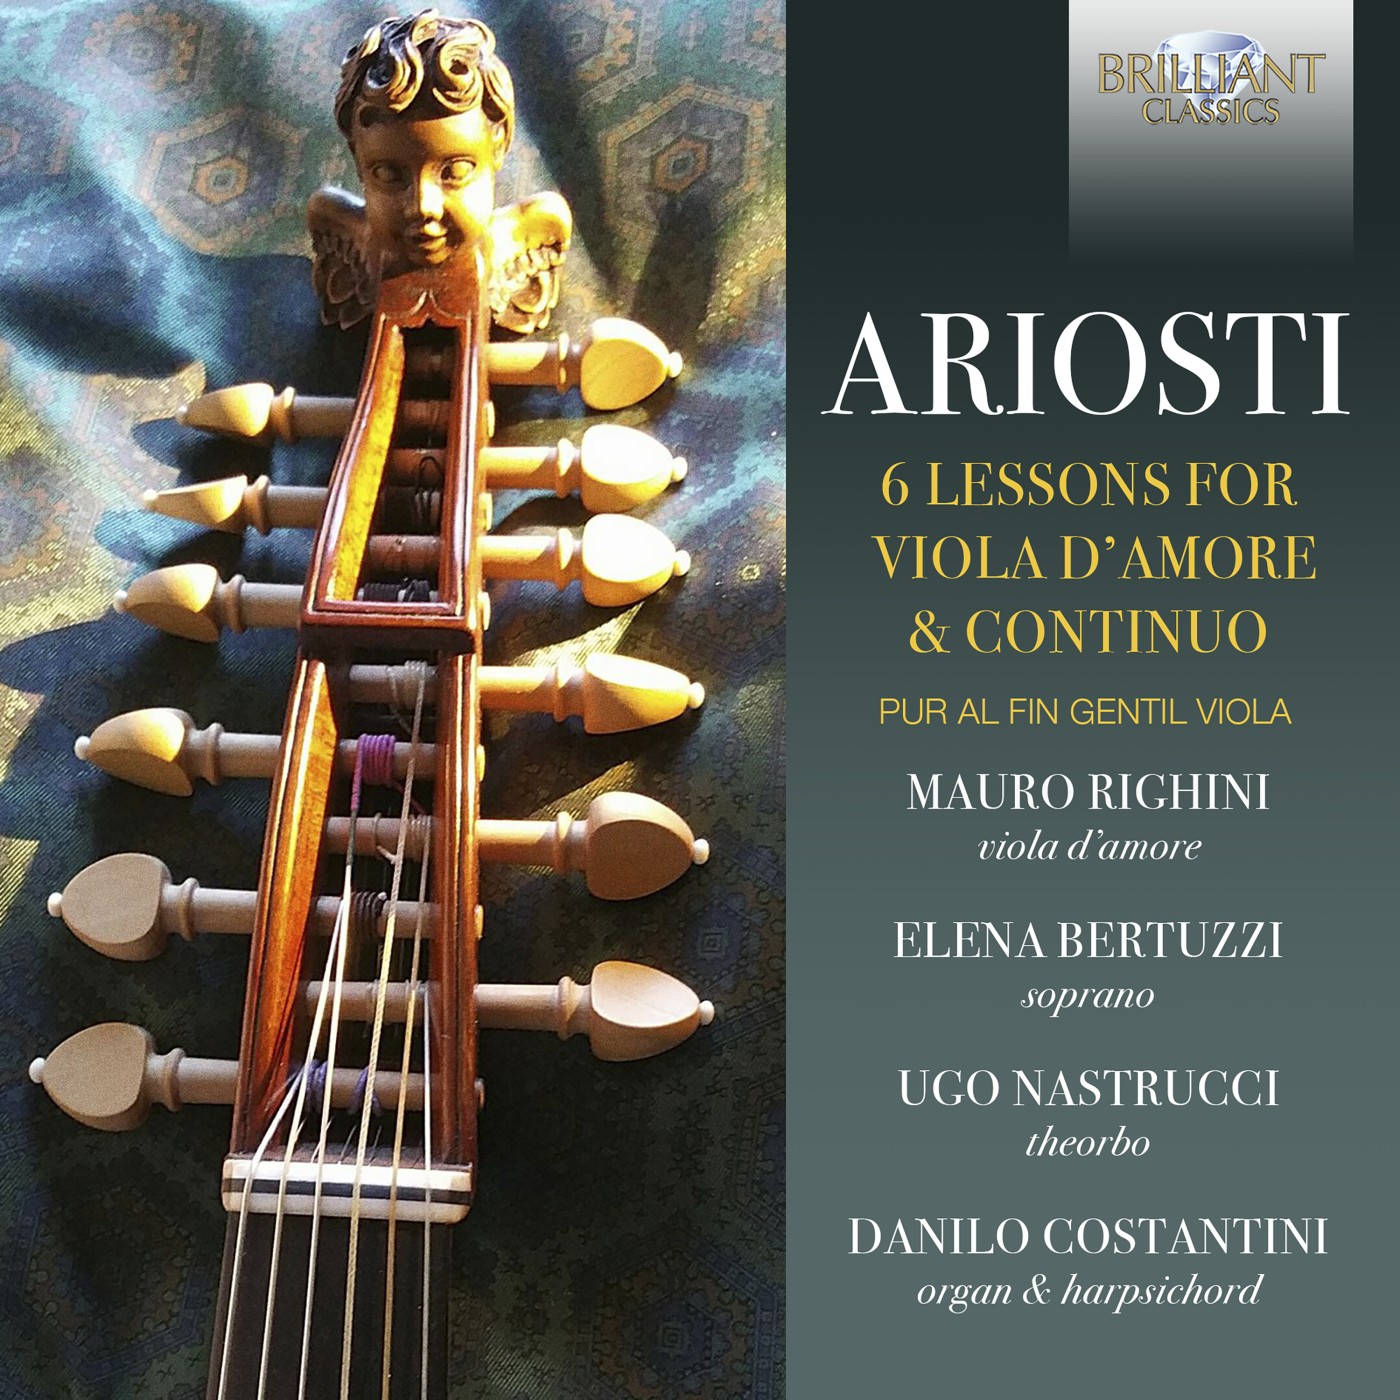 Ariosti - 6 Lessons for Viola d'Amore and Continuo, 1724 - Mauro Righini